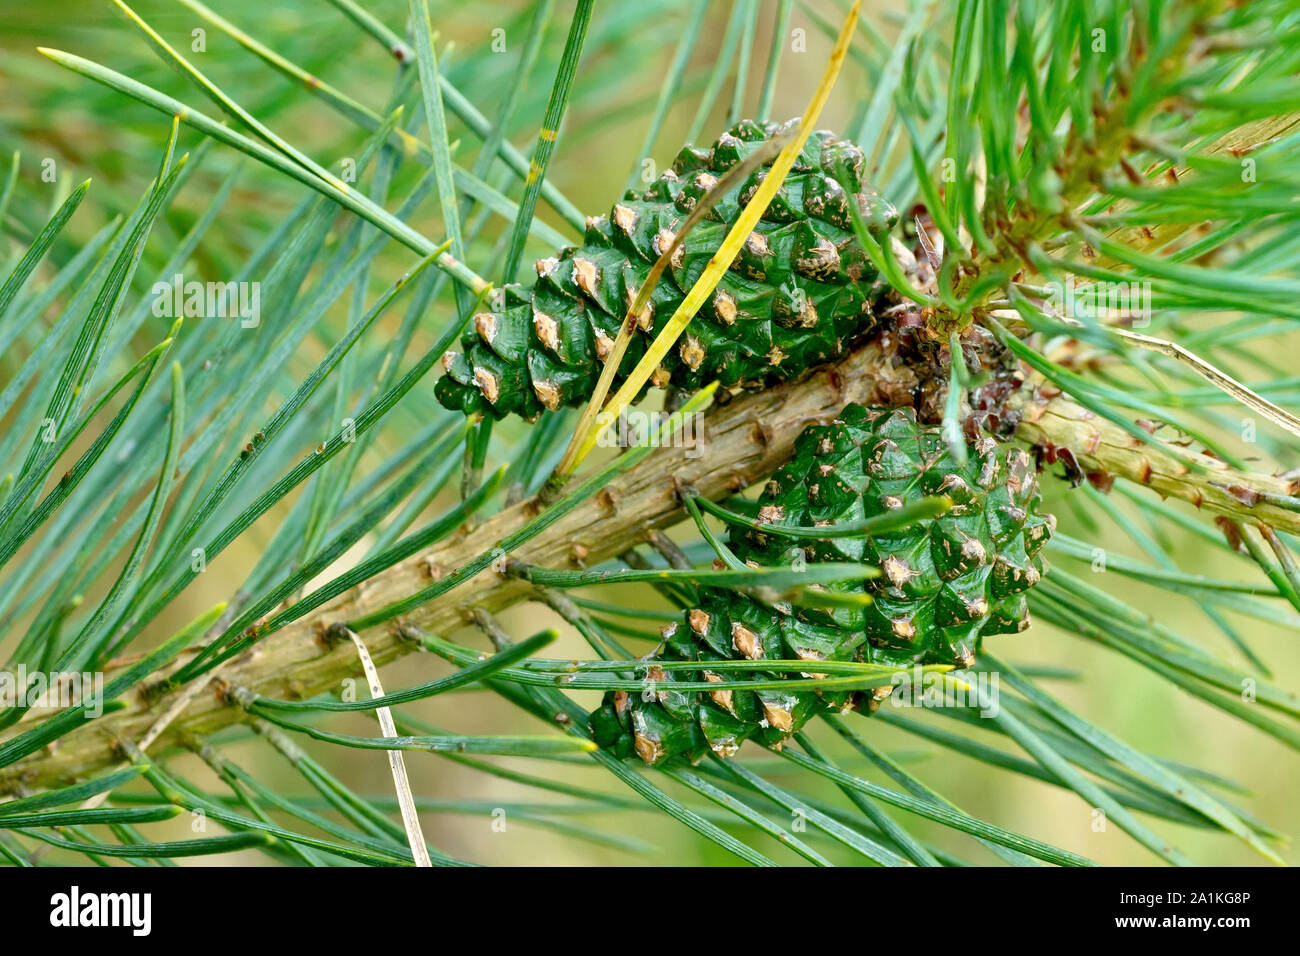 Scot's Pine (pinus sylvestris), close up showing a couple of green, immature pine cones attached to a branch. Stock Photo